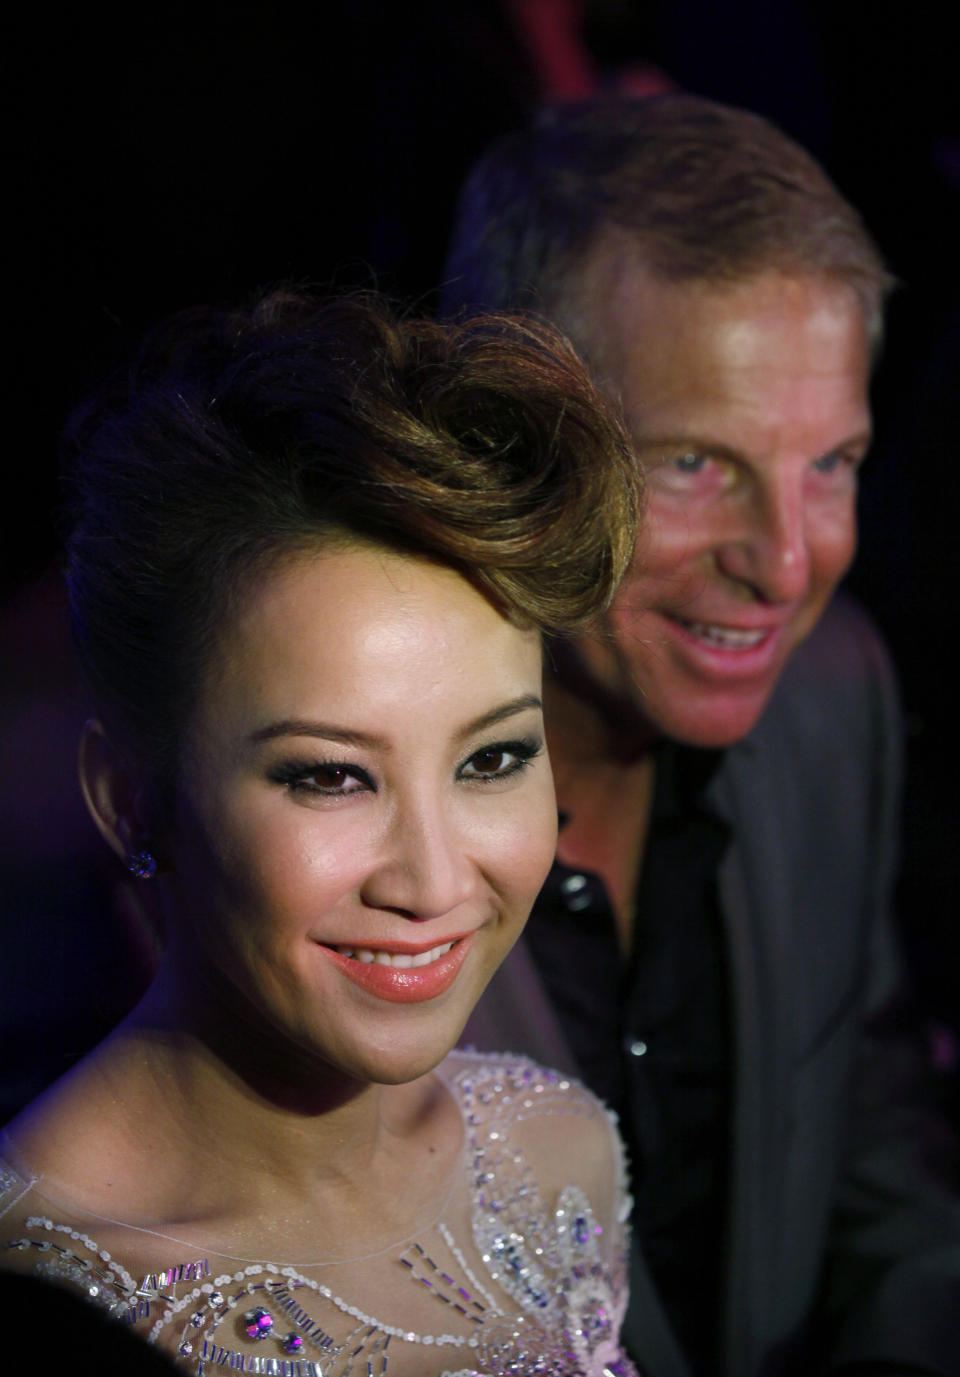 FILE - Hong Kong's pop diva Coco Lee, left, smiles with her husband, Bruce Rockowitz, president of Li & Fung Ltd., during their wedding banquet at Shaw Studio in Hong Kong, China, Friday, Oct. 28, 2011. Coco Lee, a Hong Kong-born singer who had a highly successful career in Asia, died on Wednesday, July 5, 2023. She was 48. (AP Photo/Kin Cheung, File)